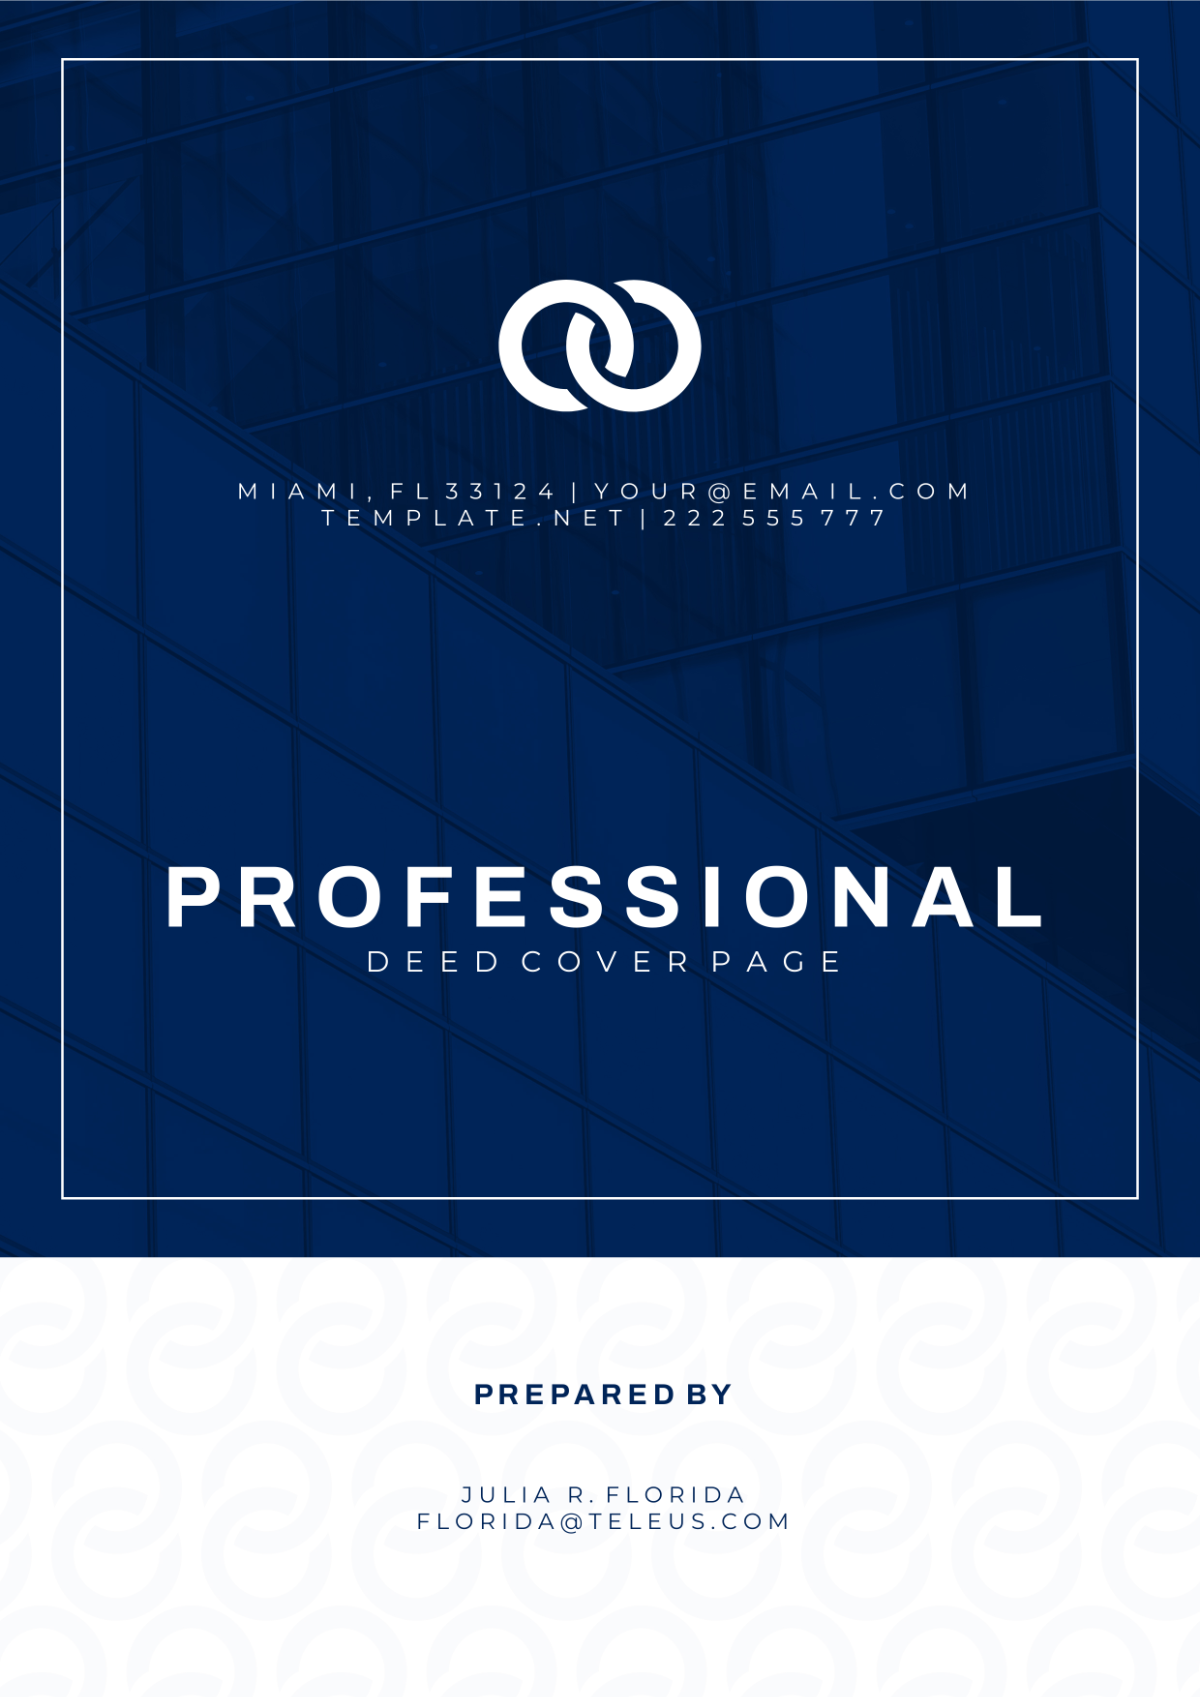 Professional Deed Cover Page